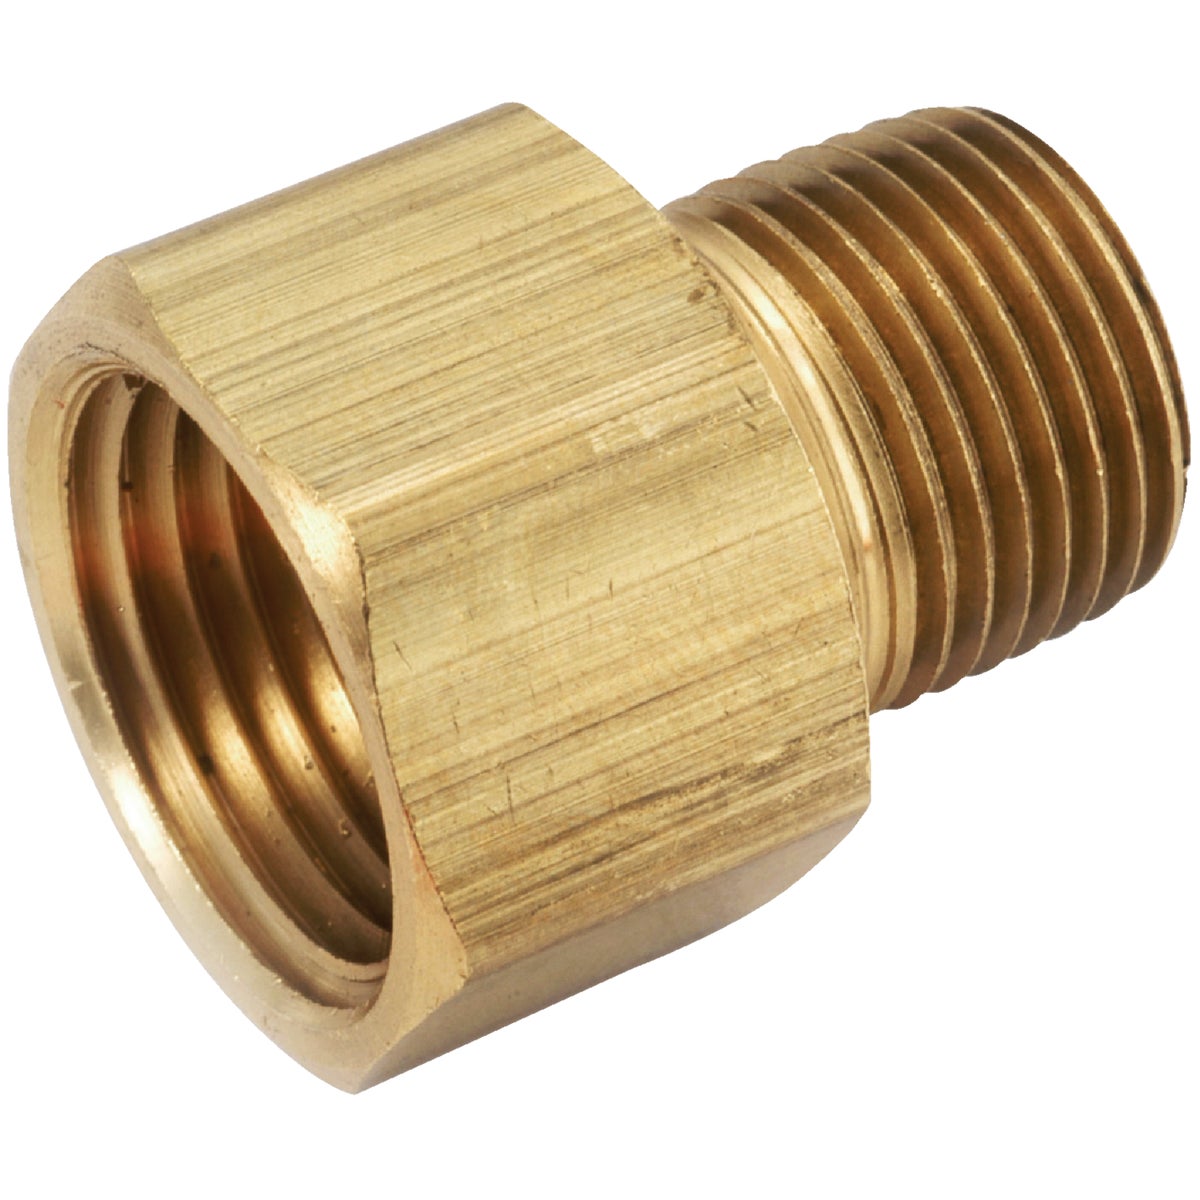 Anderson Metals 3/8 In. FPT x 1/4 In. MPT Brass Adapter